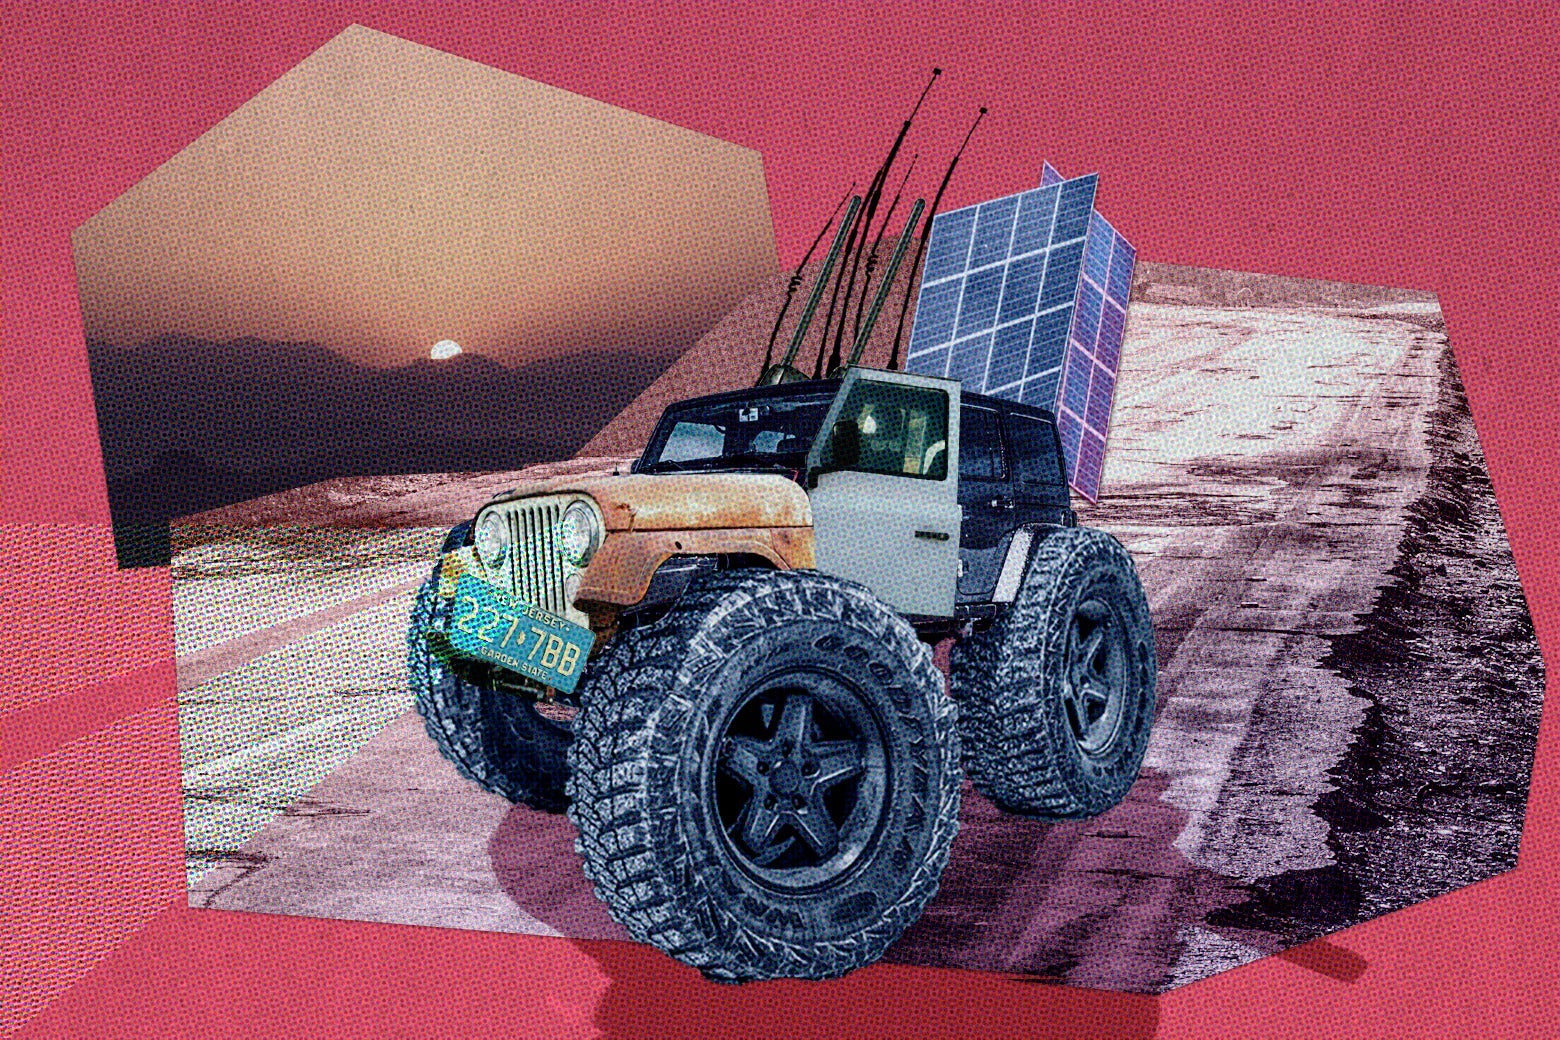 A giant truck with solar panels folded at the rear drives on a ruined road.